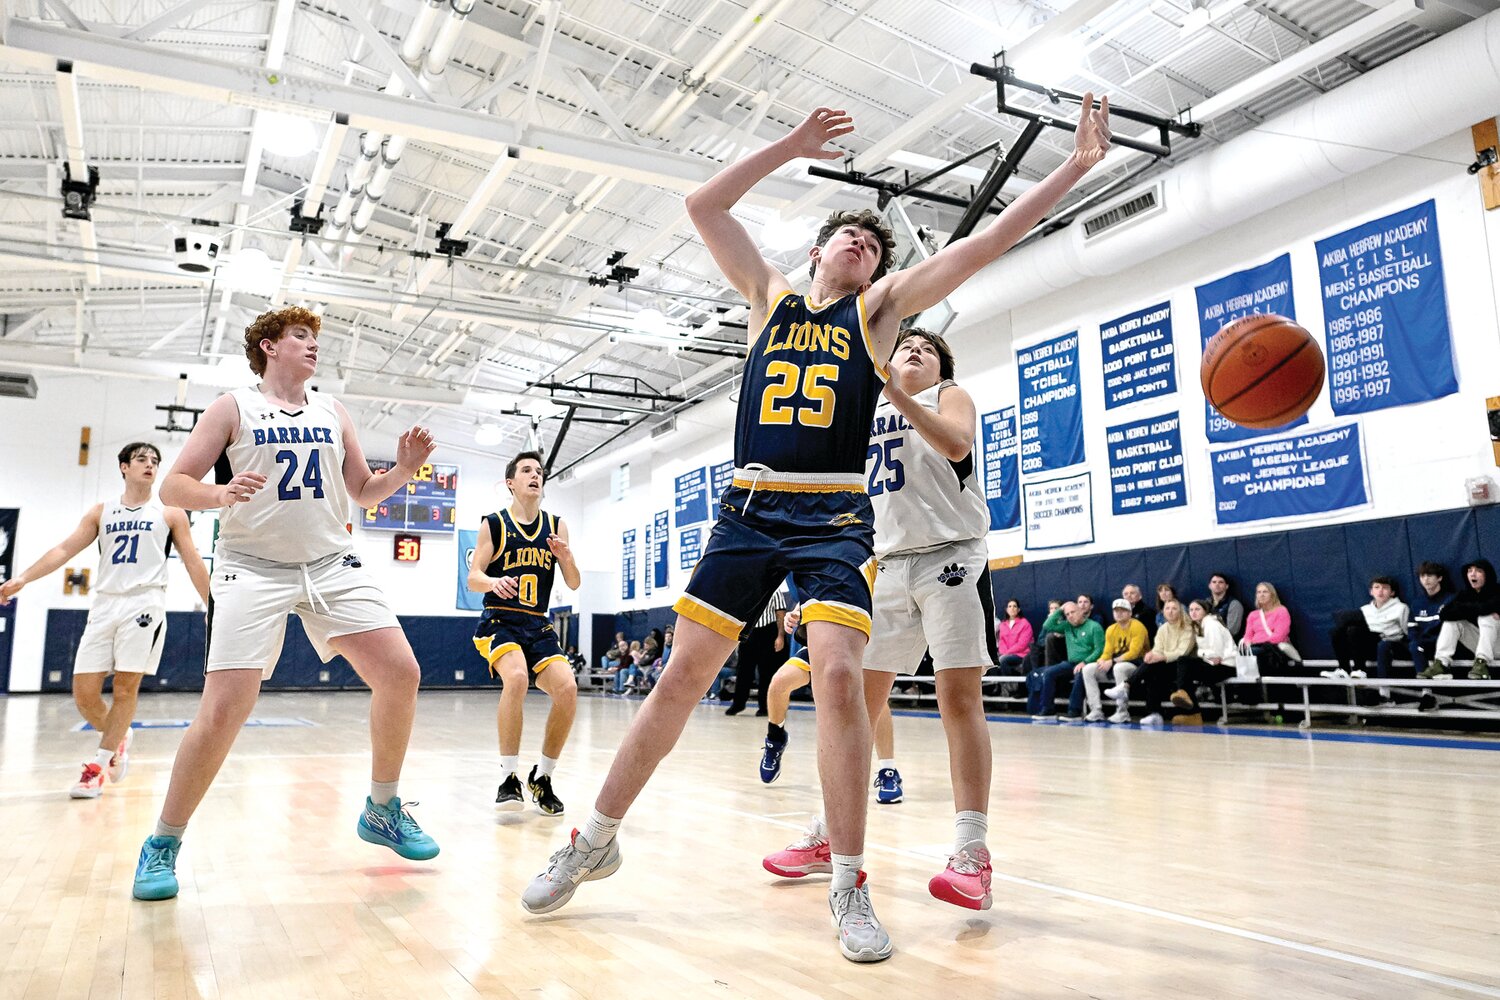 New Hope-Solebury’s Nicholas Rieder loses control of a rebound in front of Jack M. Barrack Hebrew Academy’s Max Shapiro.